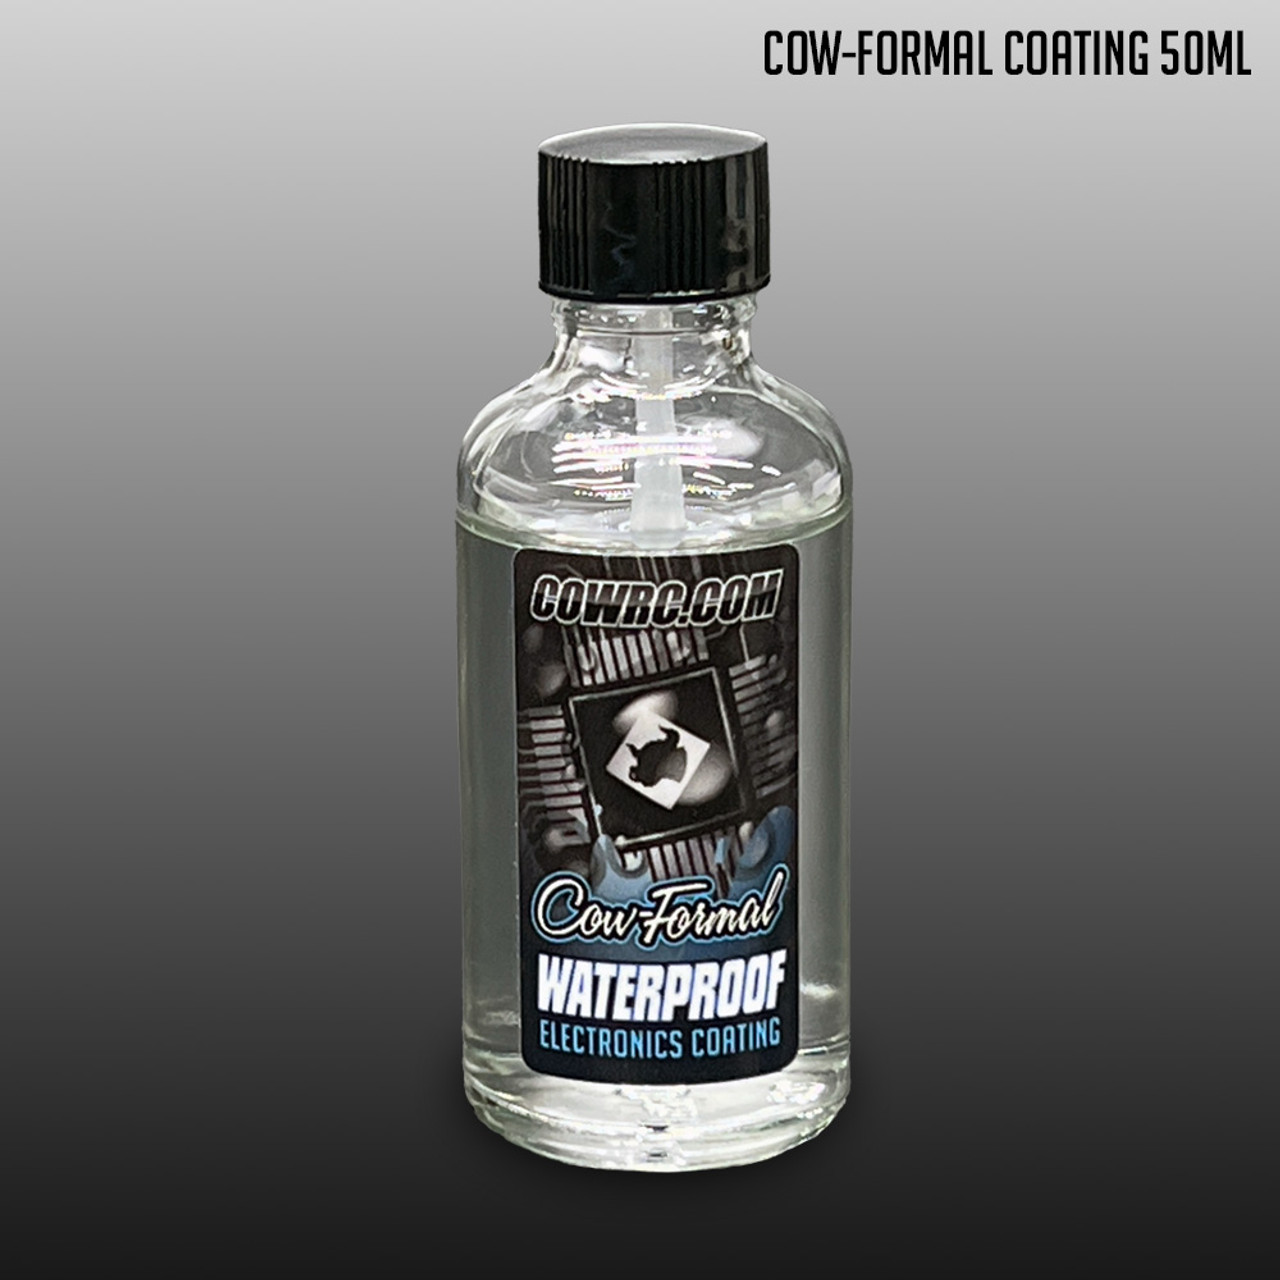 50ml Cow-Formal Silicone Conformal Coating